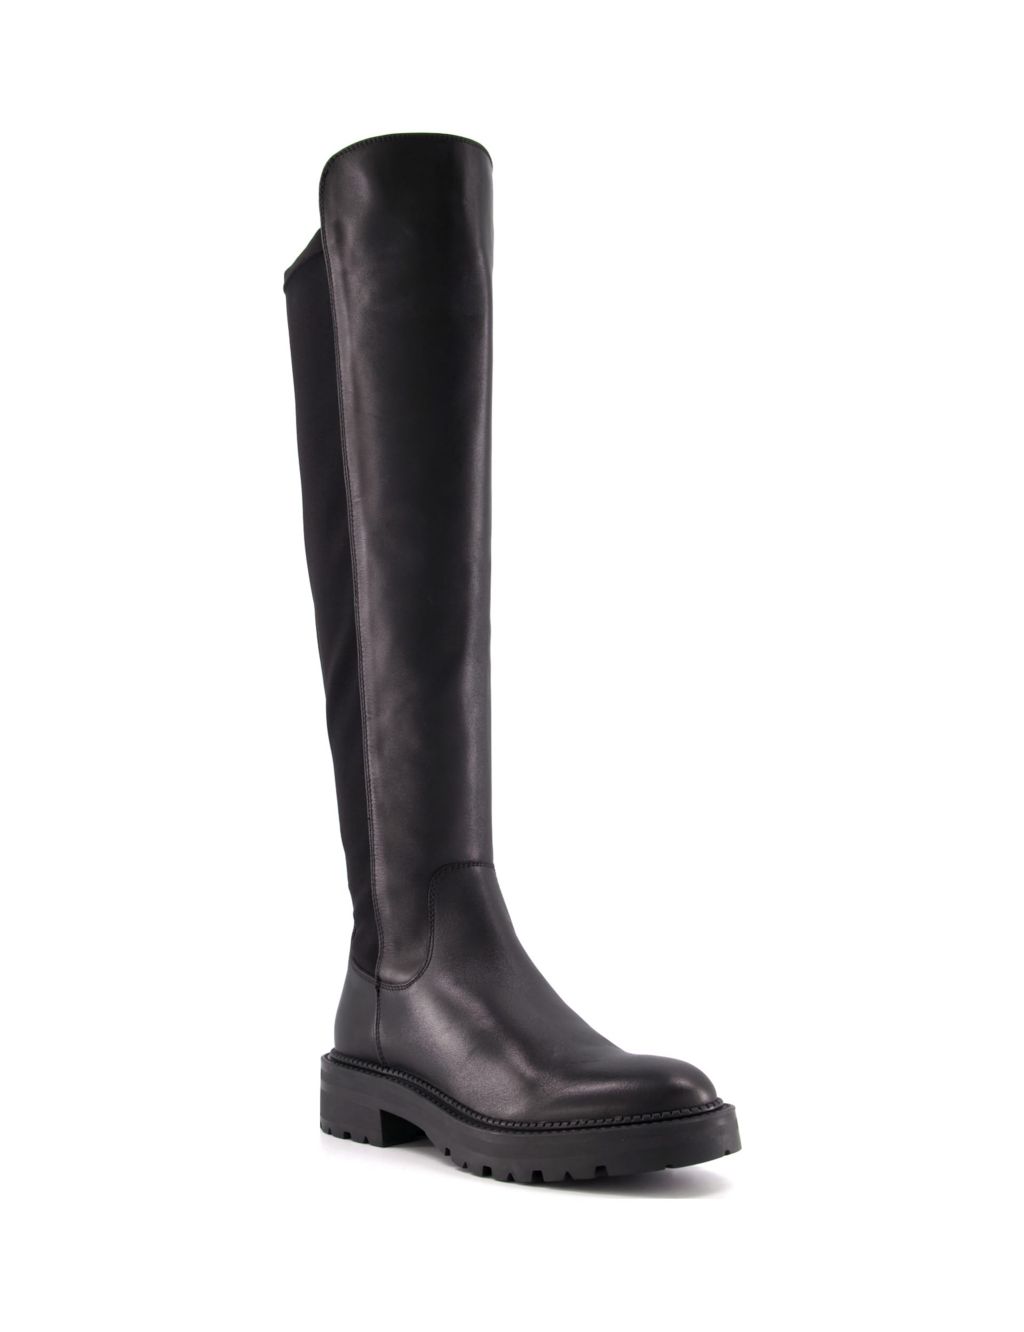 Leather Cleated Flatform Knee High Boots | Dune London | M&S